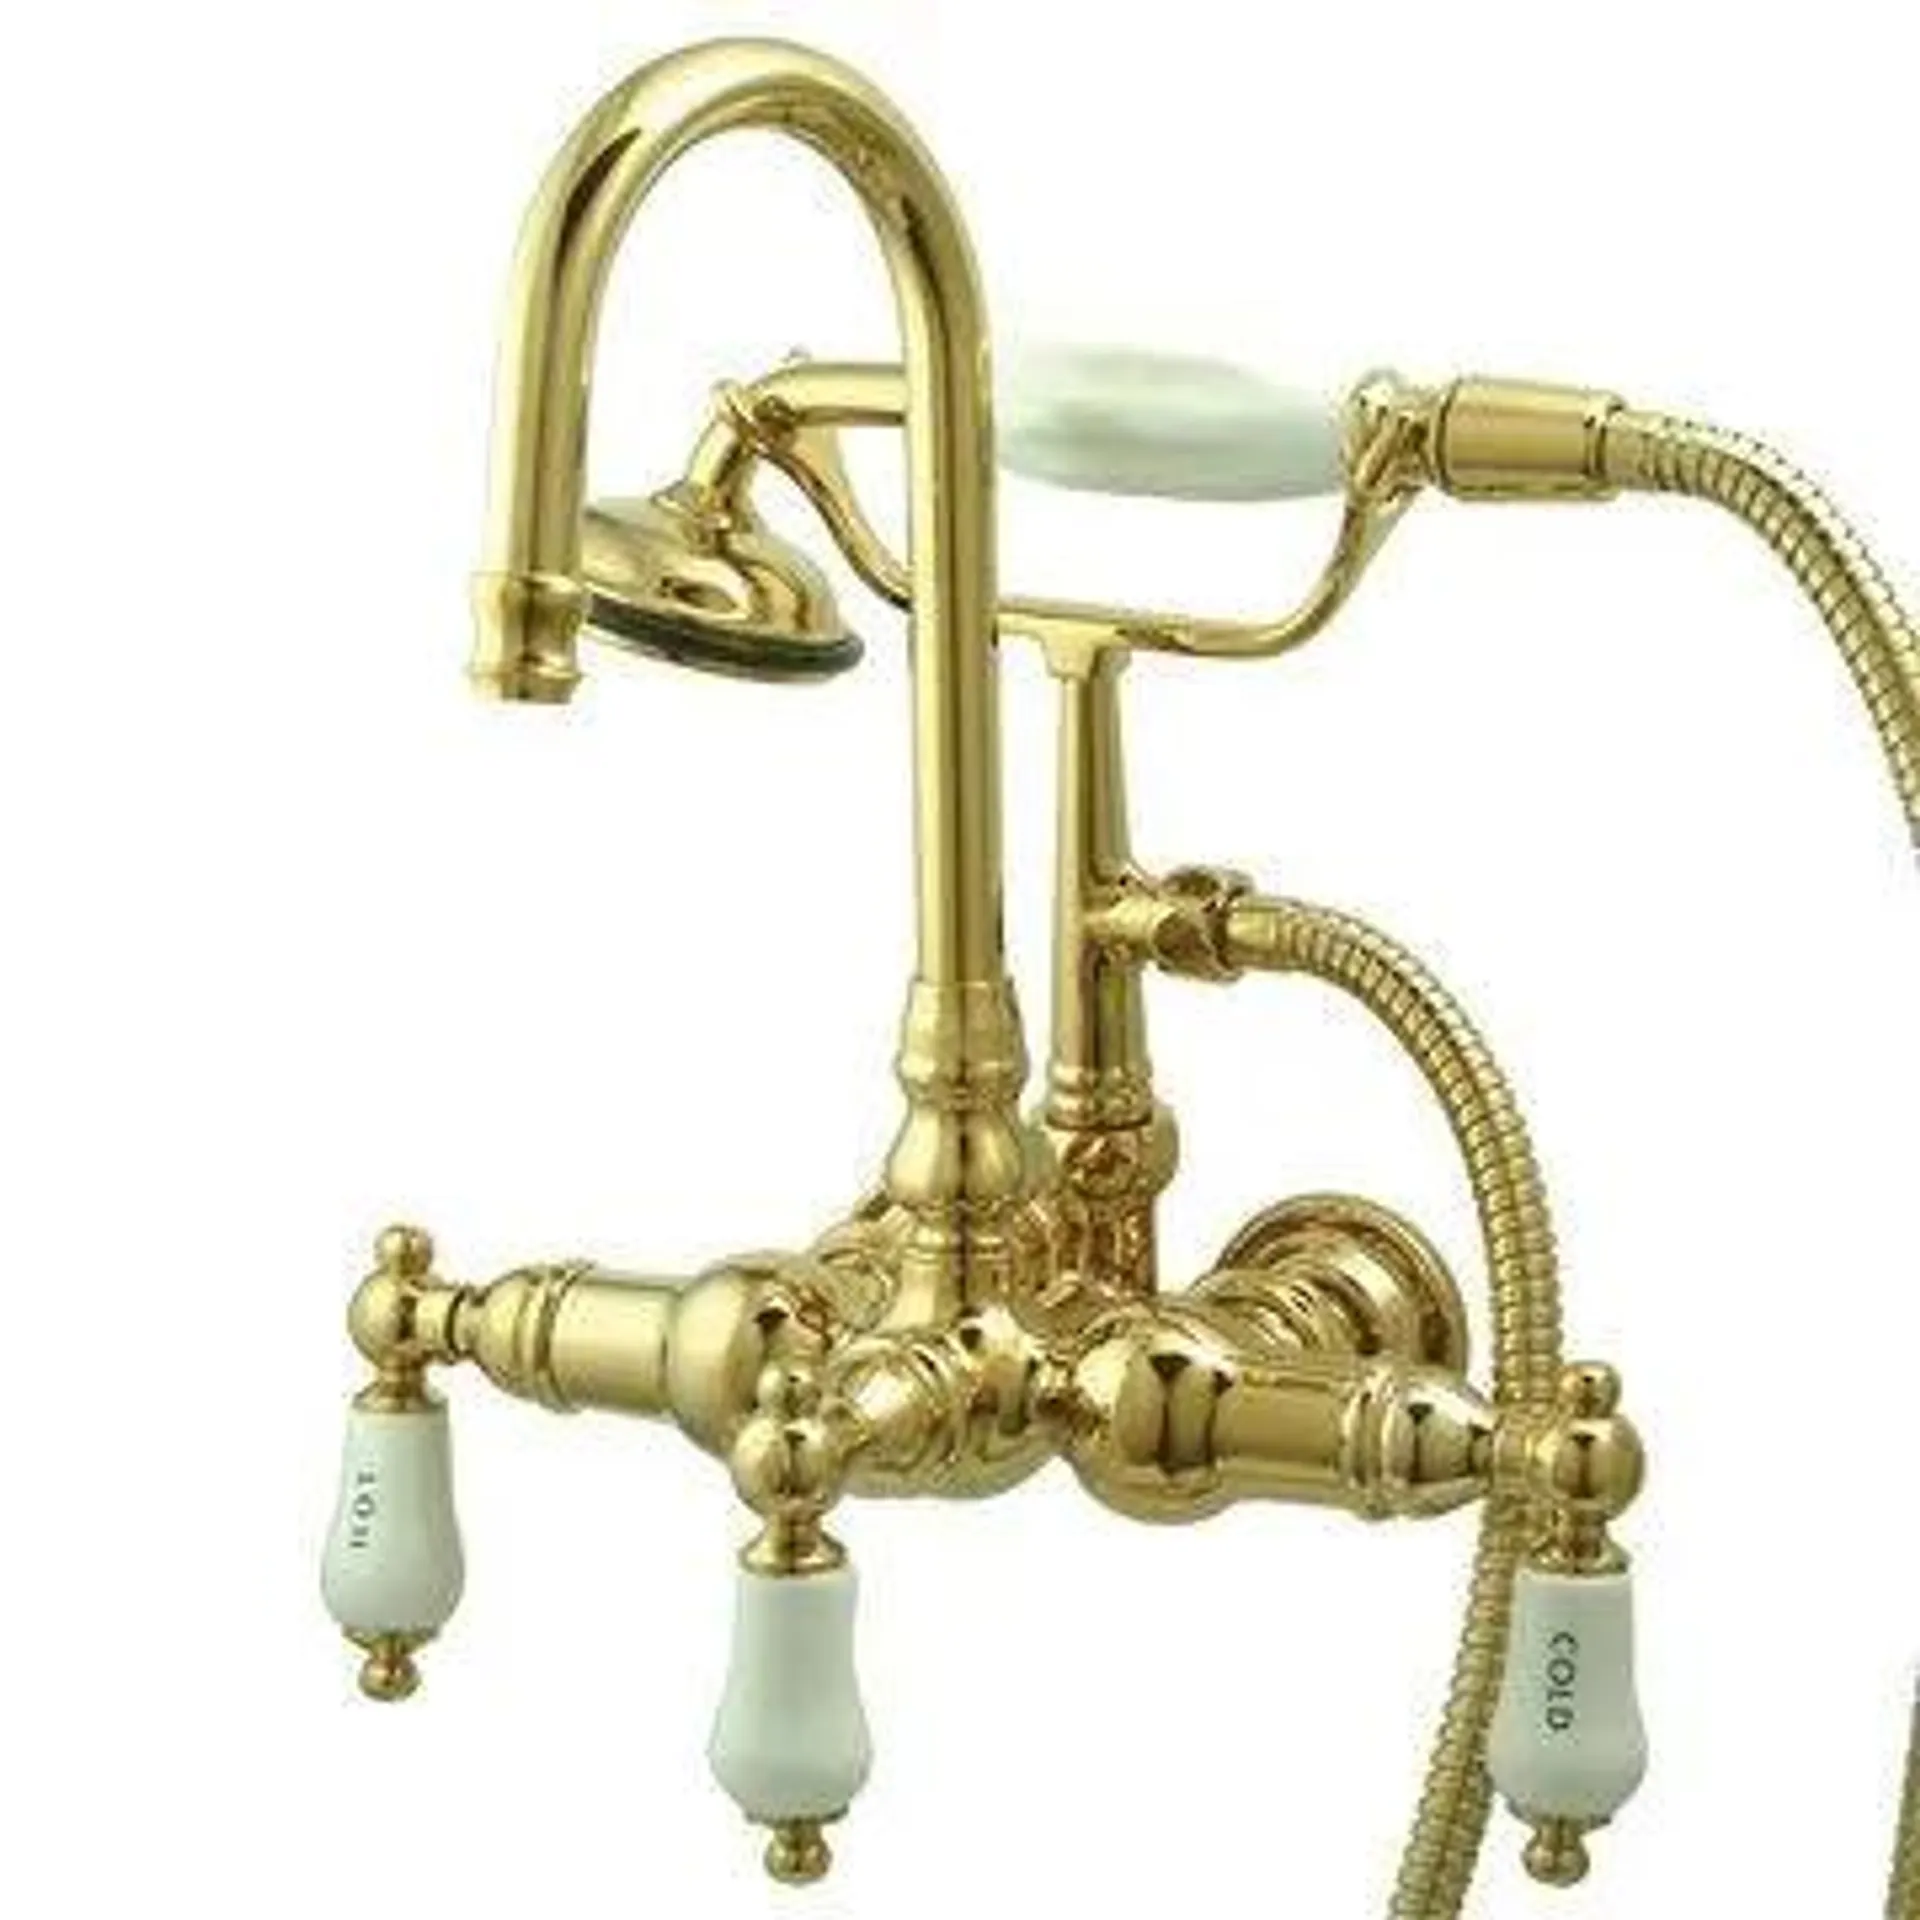 Restorers Clawfoot Tub Faucet with Hand Shower - H&C Porcelain Lever